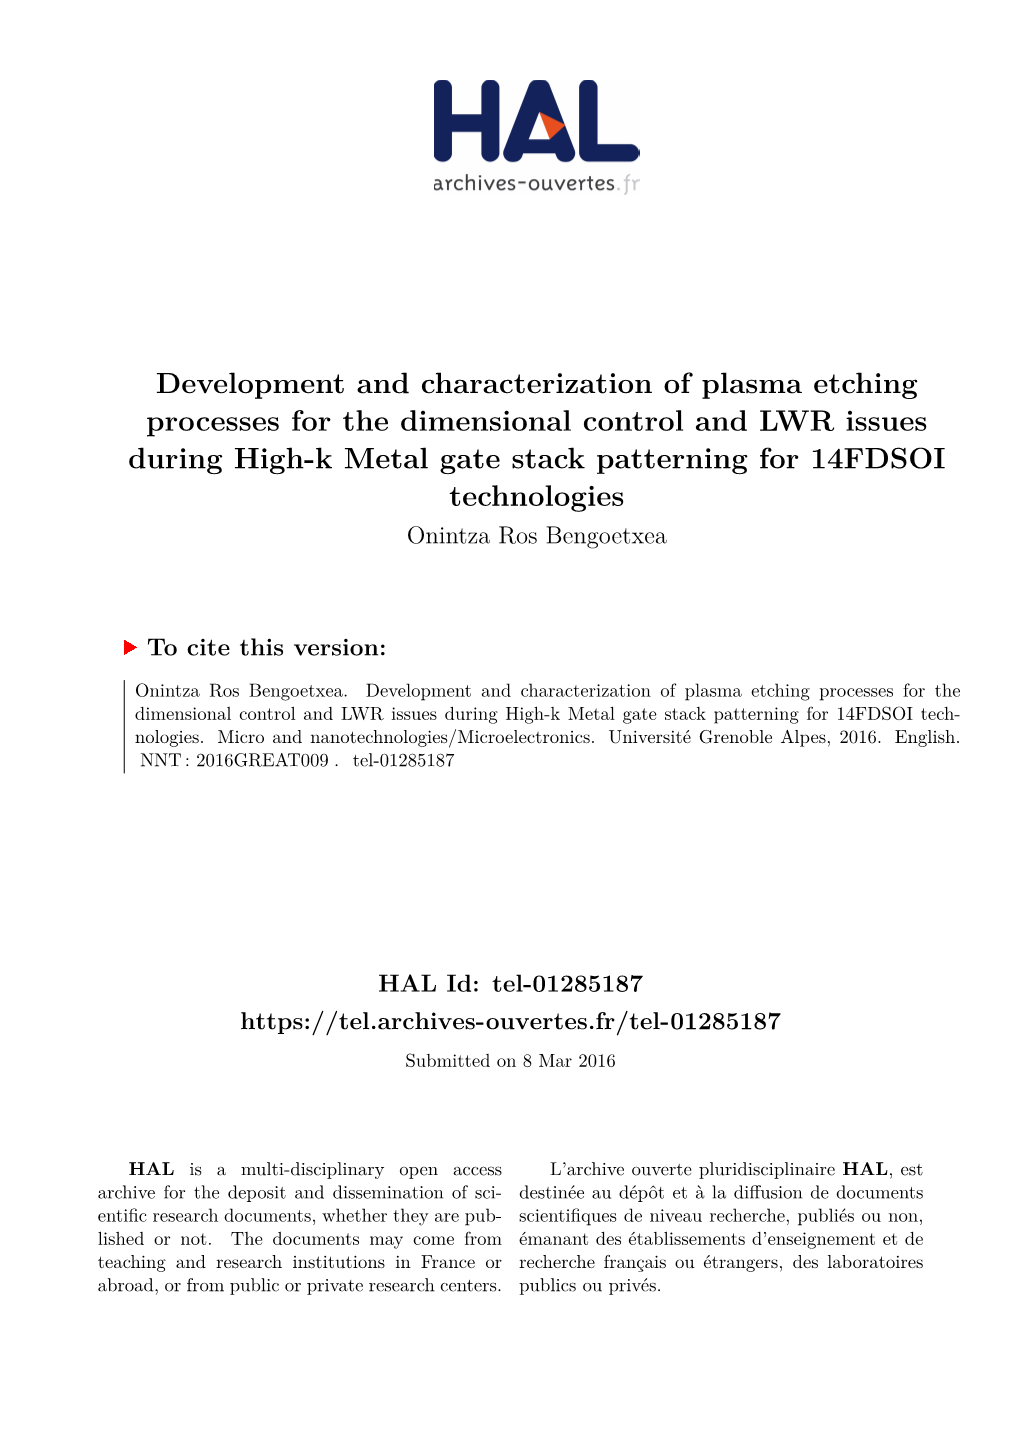 Development and Characterization of Plasma Etching Processes for The